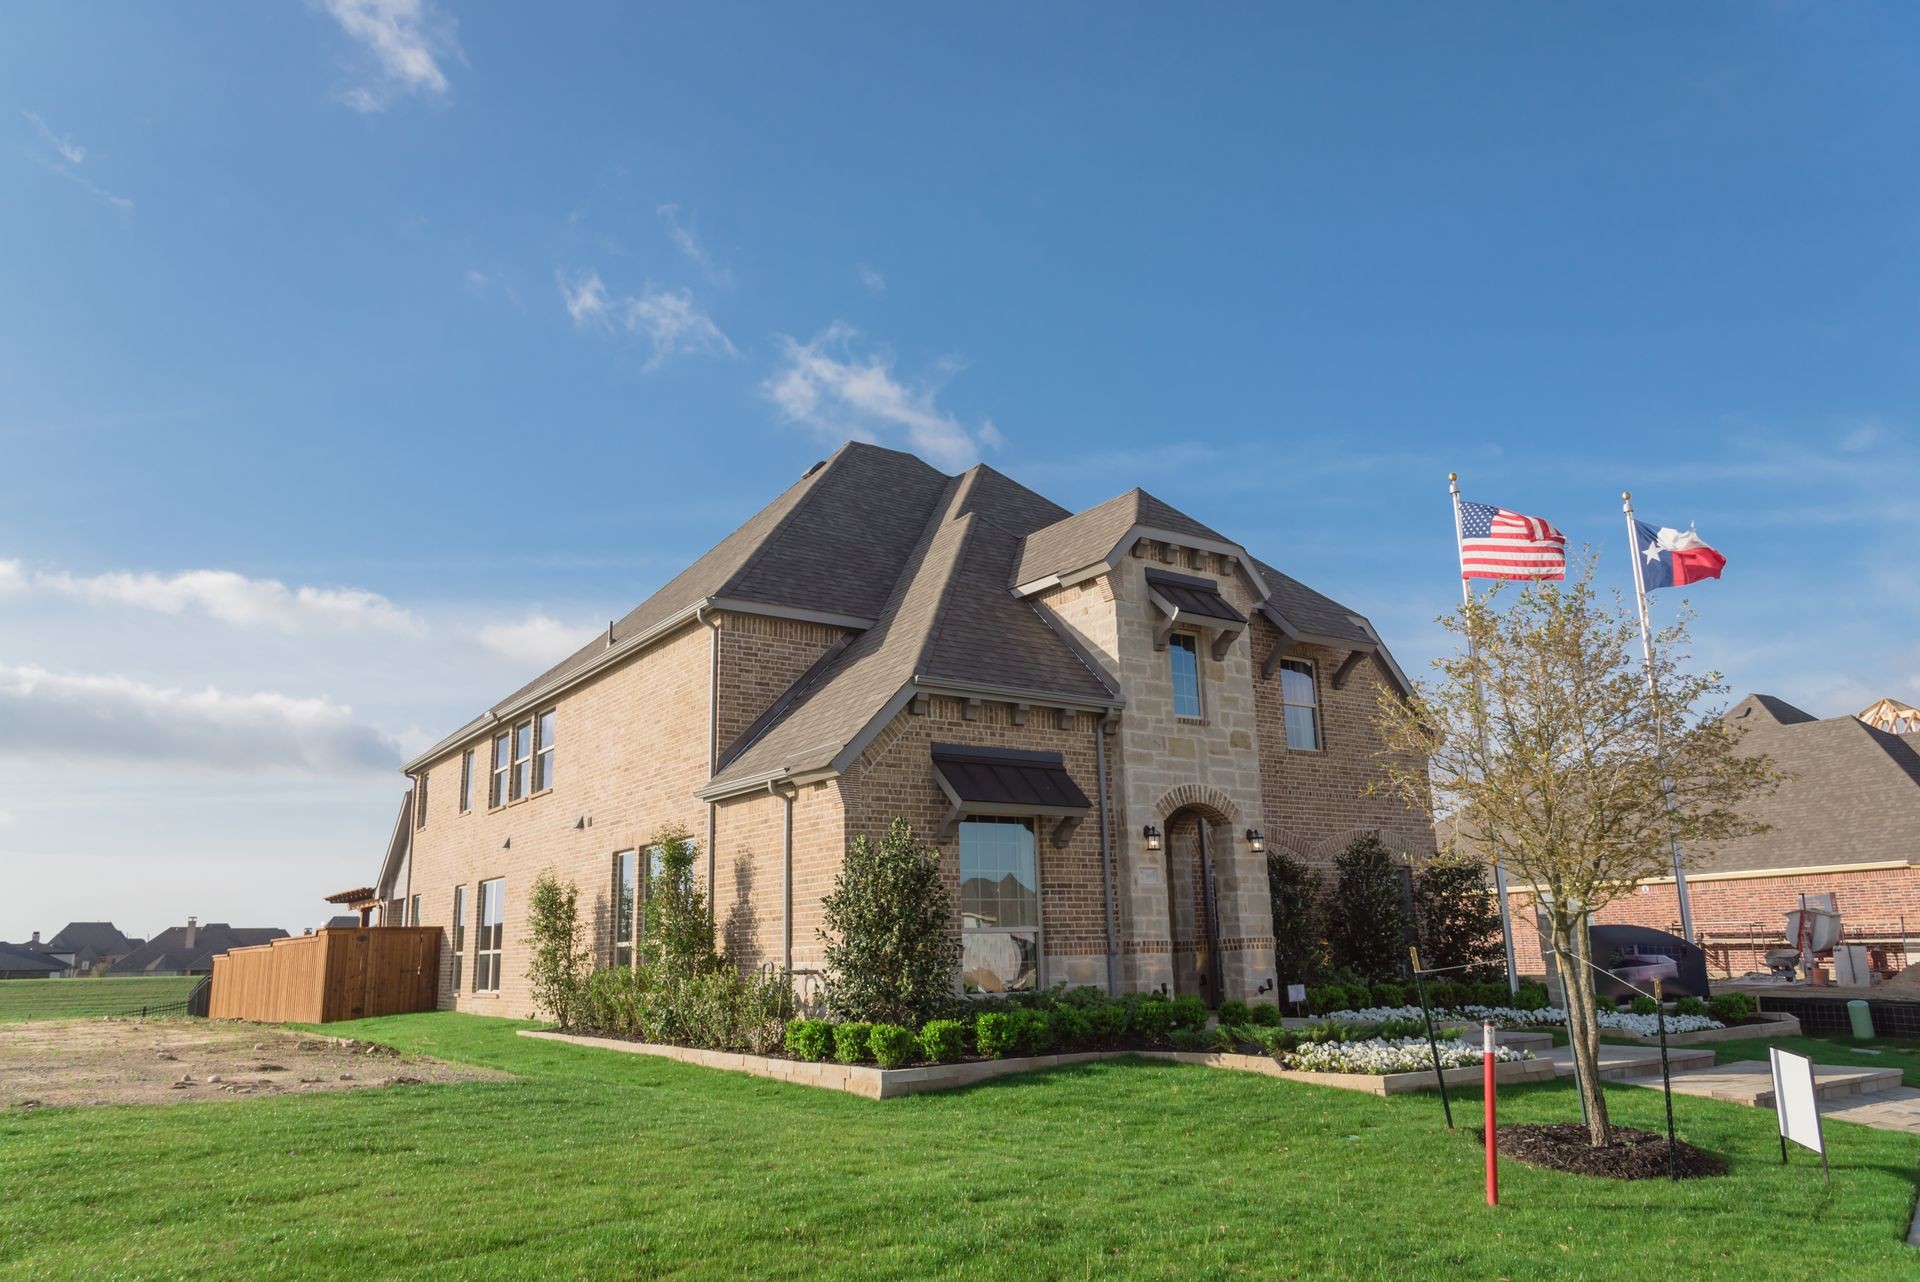 Model home and construction office of new boutique community neighborhood in Irving, Texas, USA. Brand new two story residential house, newly constructed, freshly built with landscaped yard